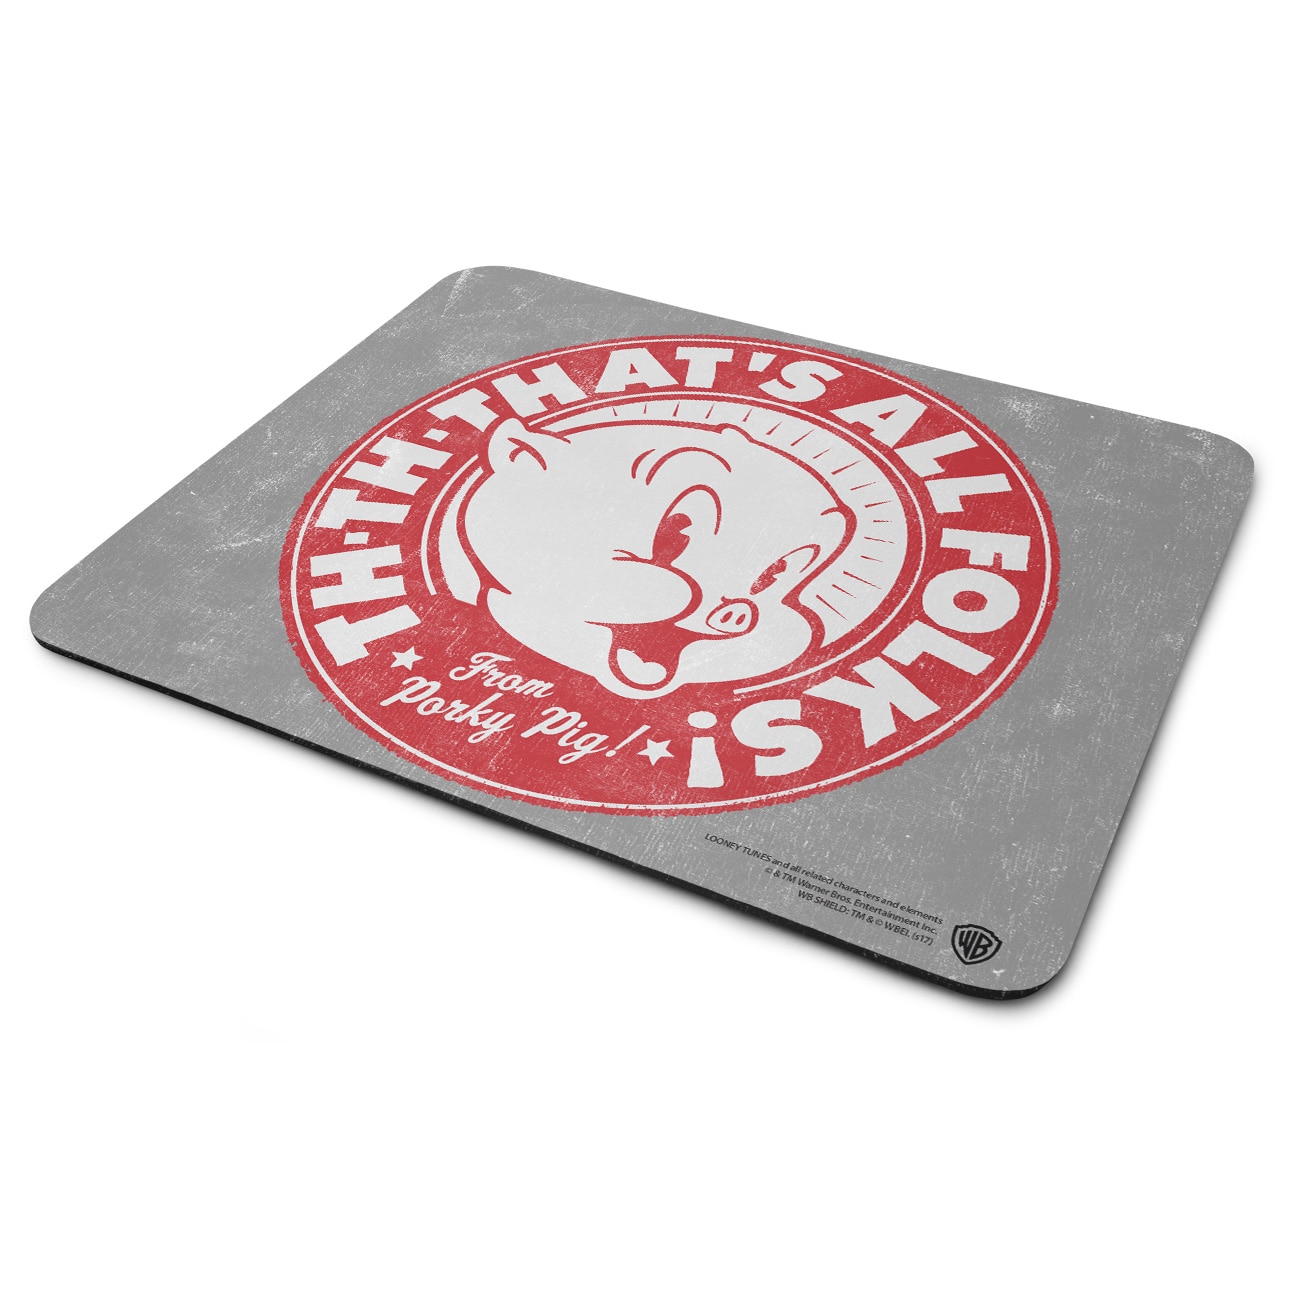 Porky Pig - That's All Folks! Mouse Pad